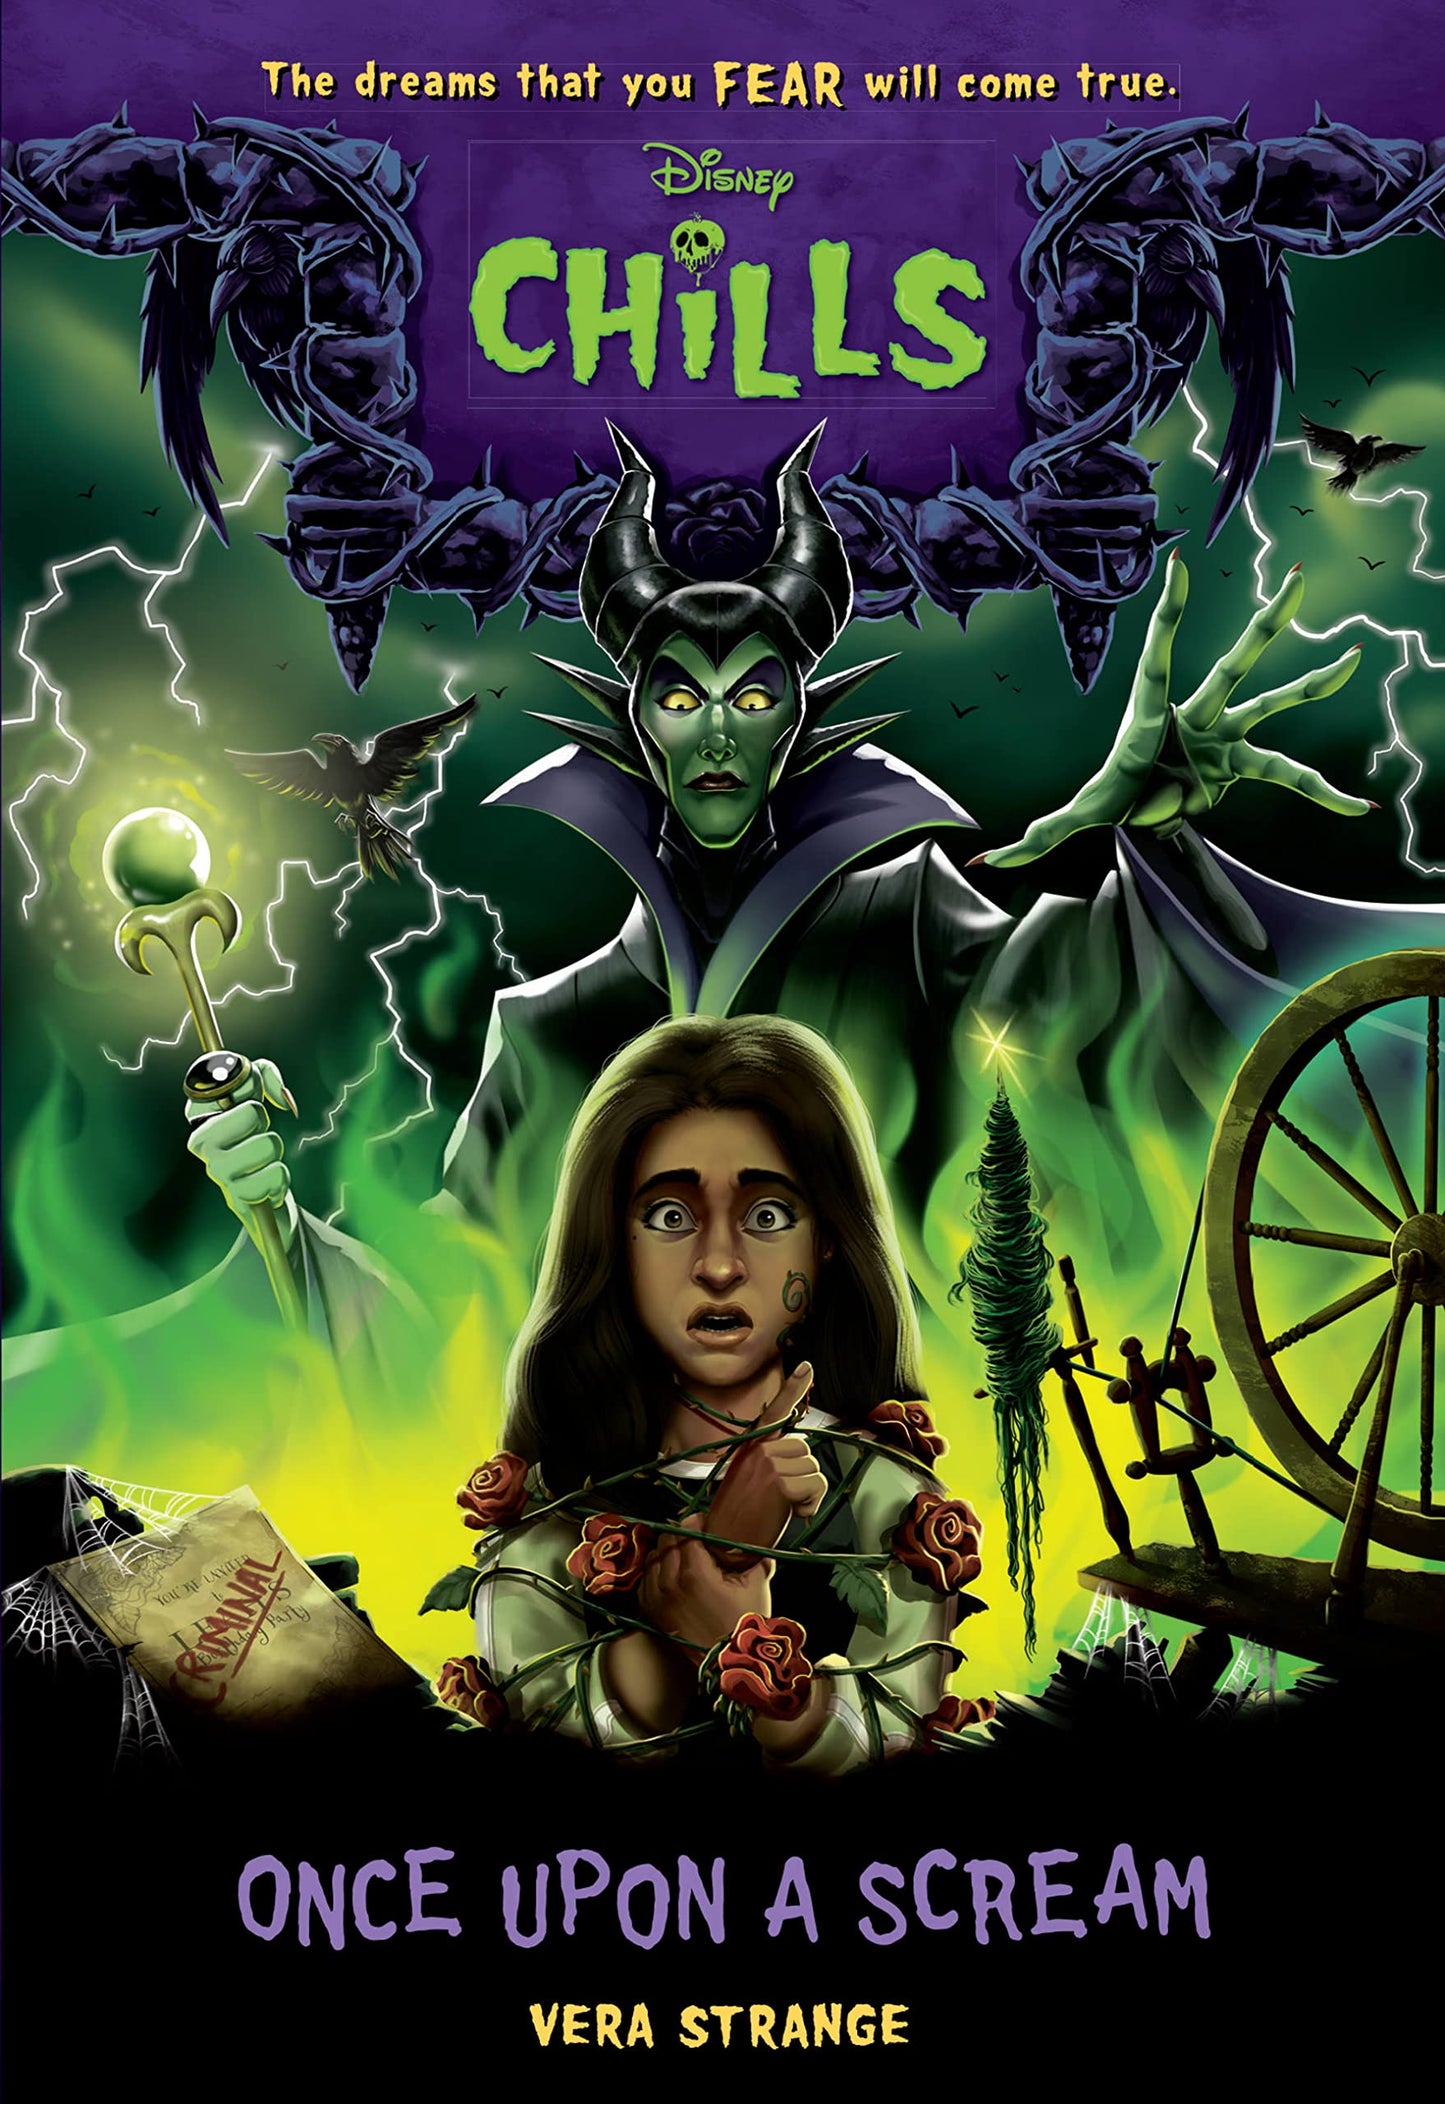 Once Upon a Scream (Disney Chills #6)